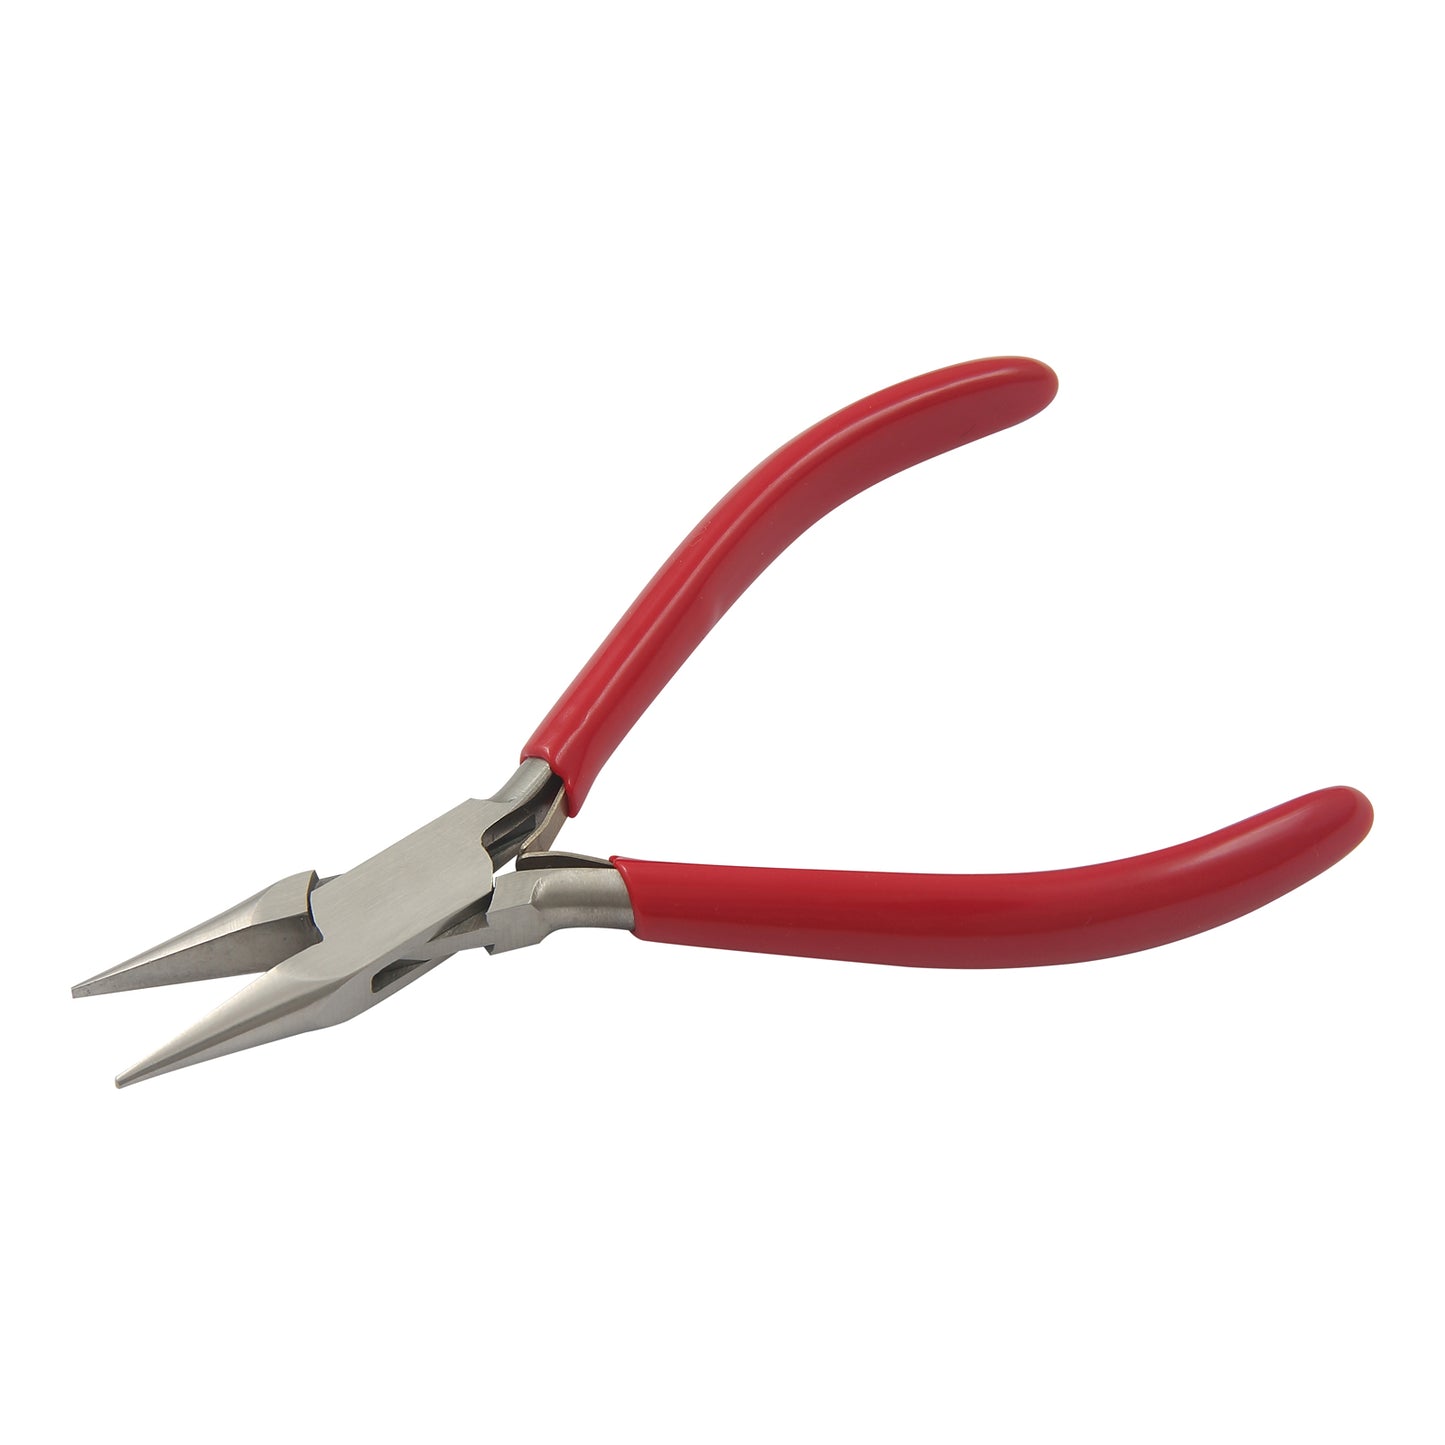 Flat nose plier, Size 130mm, smooth jaws, with double leaf spring & PVC handles